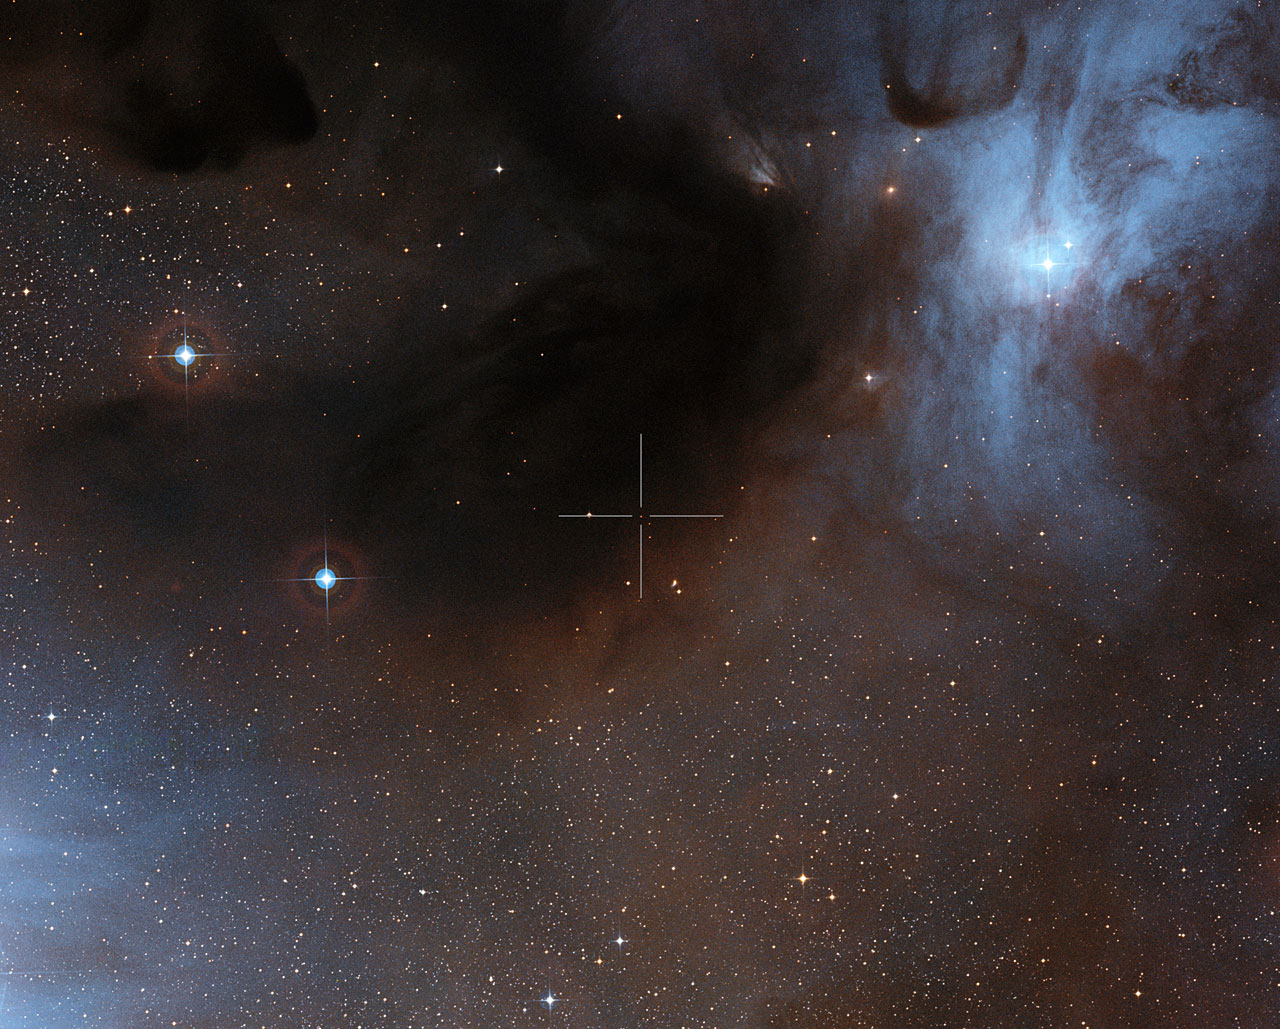 http://www.eso.org/public/archives/images/screen/eso1248c.jpg